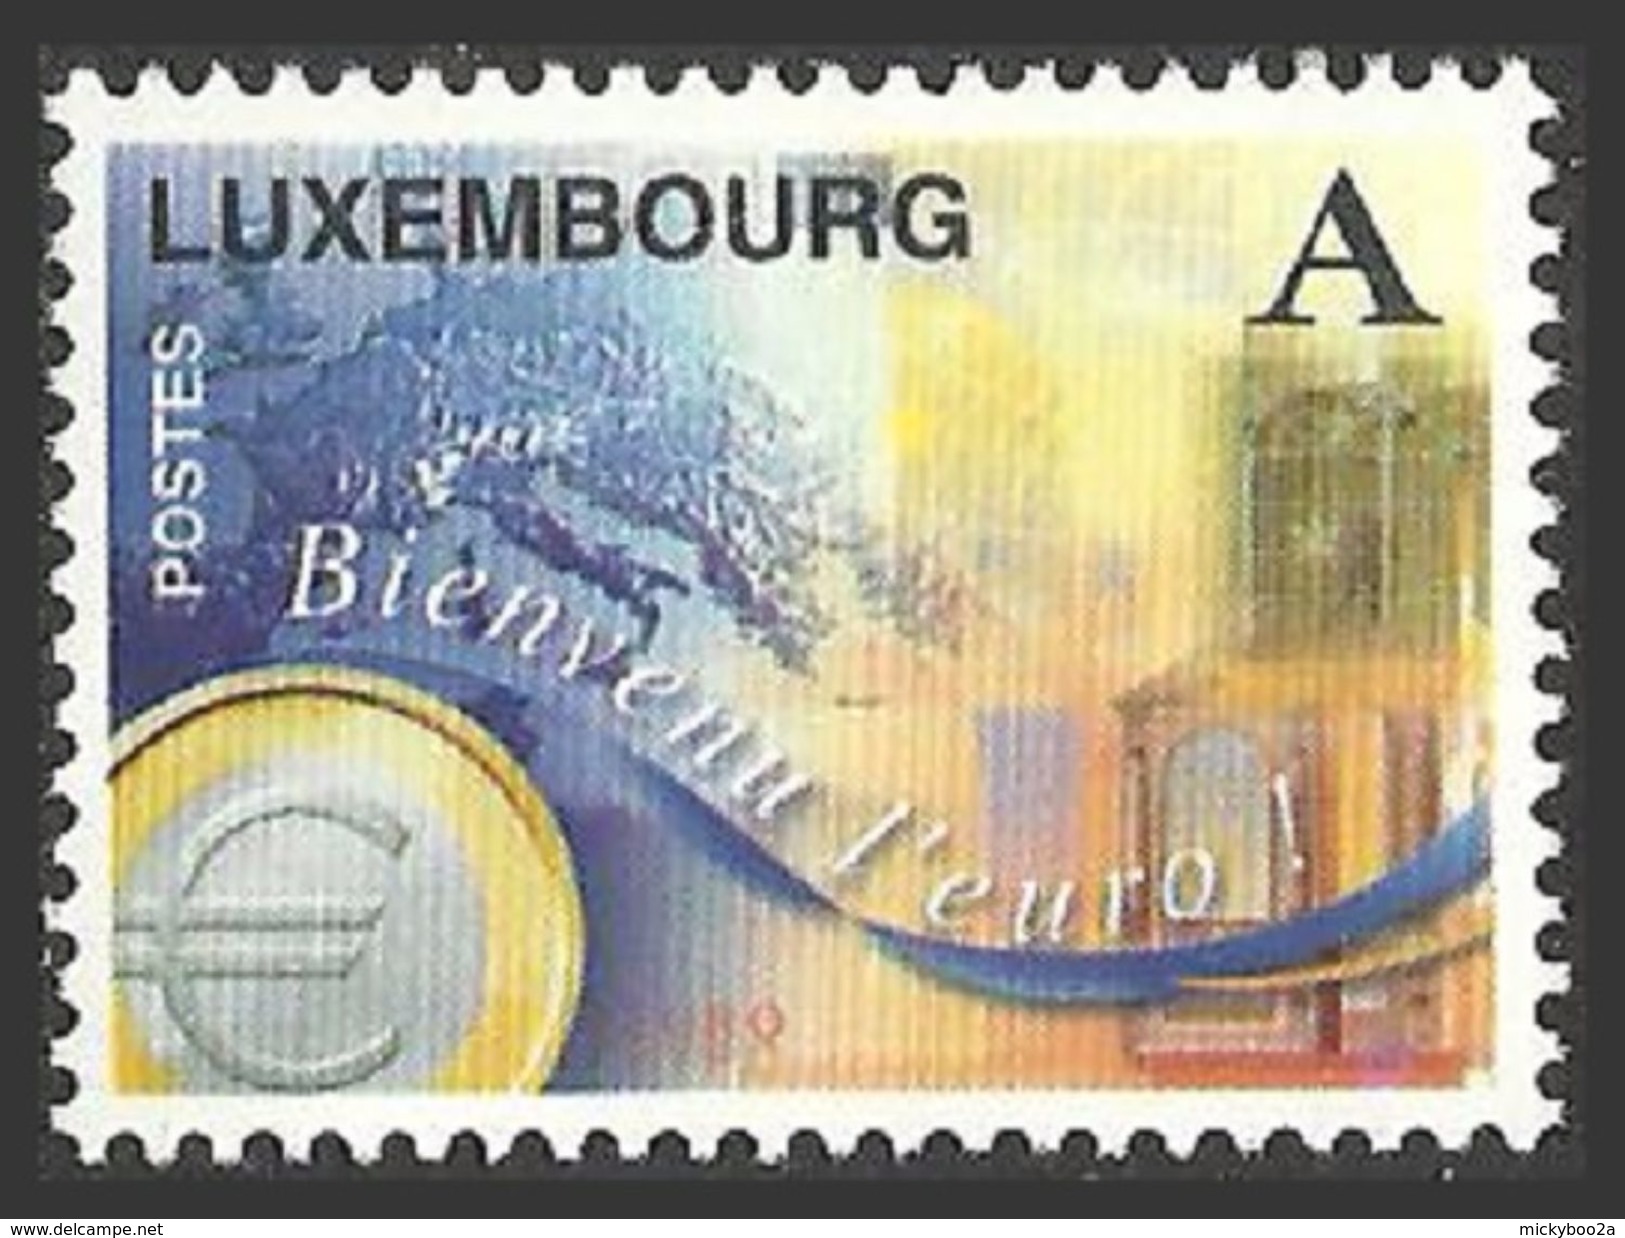 LUXEMBOURG 1999 INTRODUCTION OF THE EURO EUROPEAN CURRENCY SET MNH - Neufs